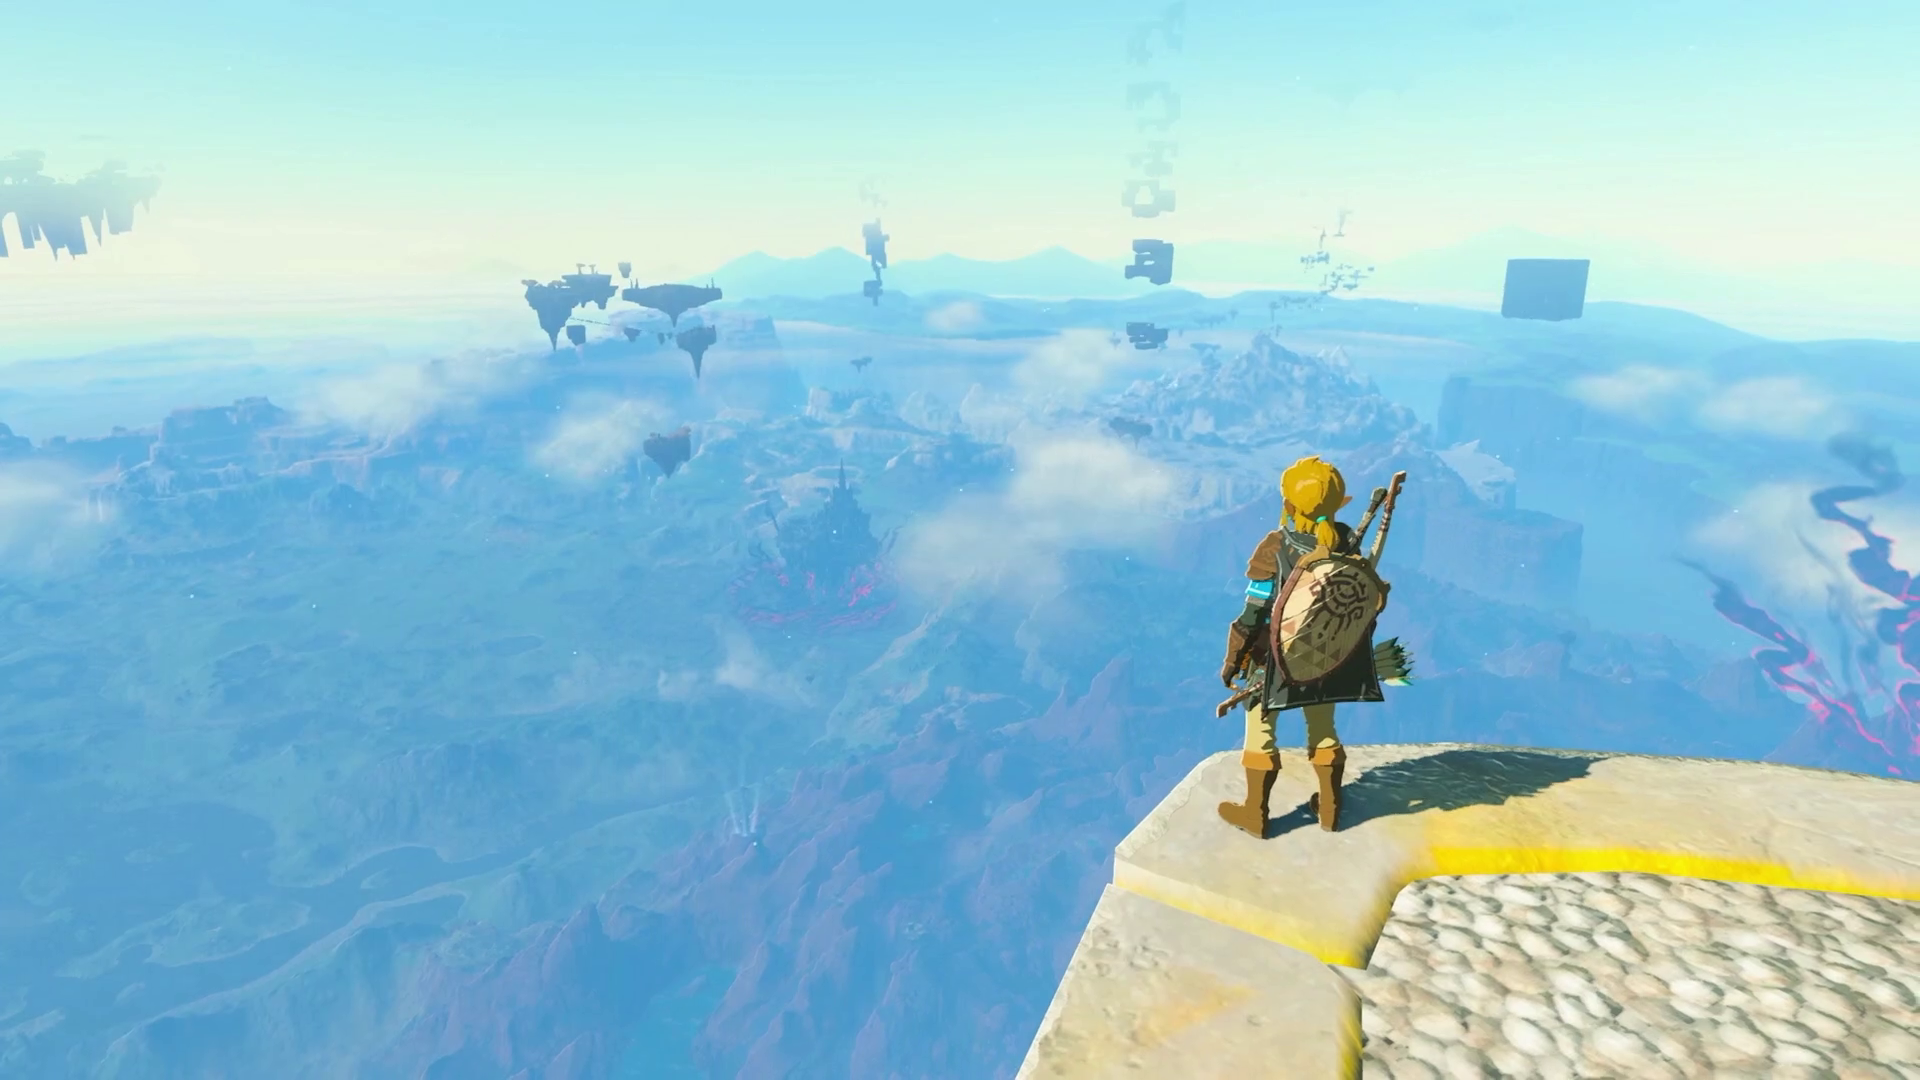 Link overlooking Hyrule from a very high tower.